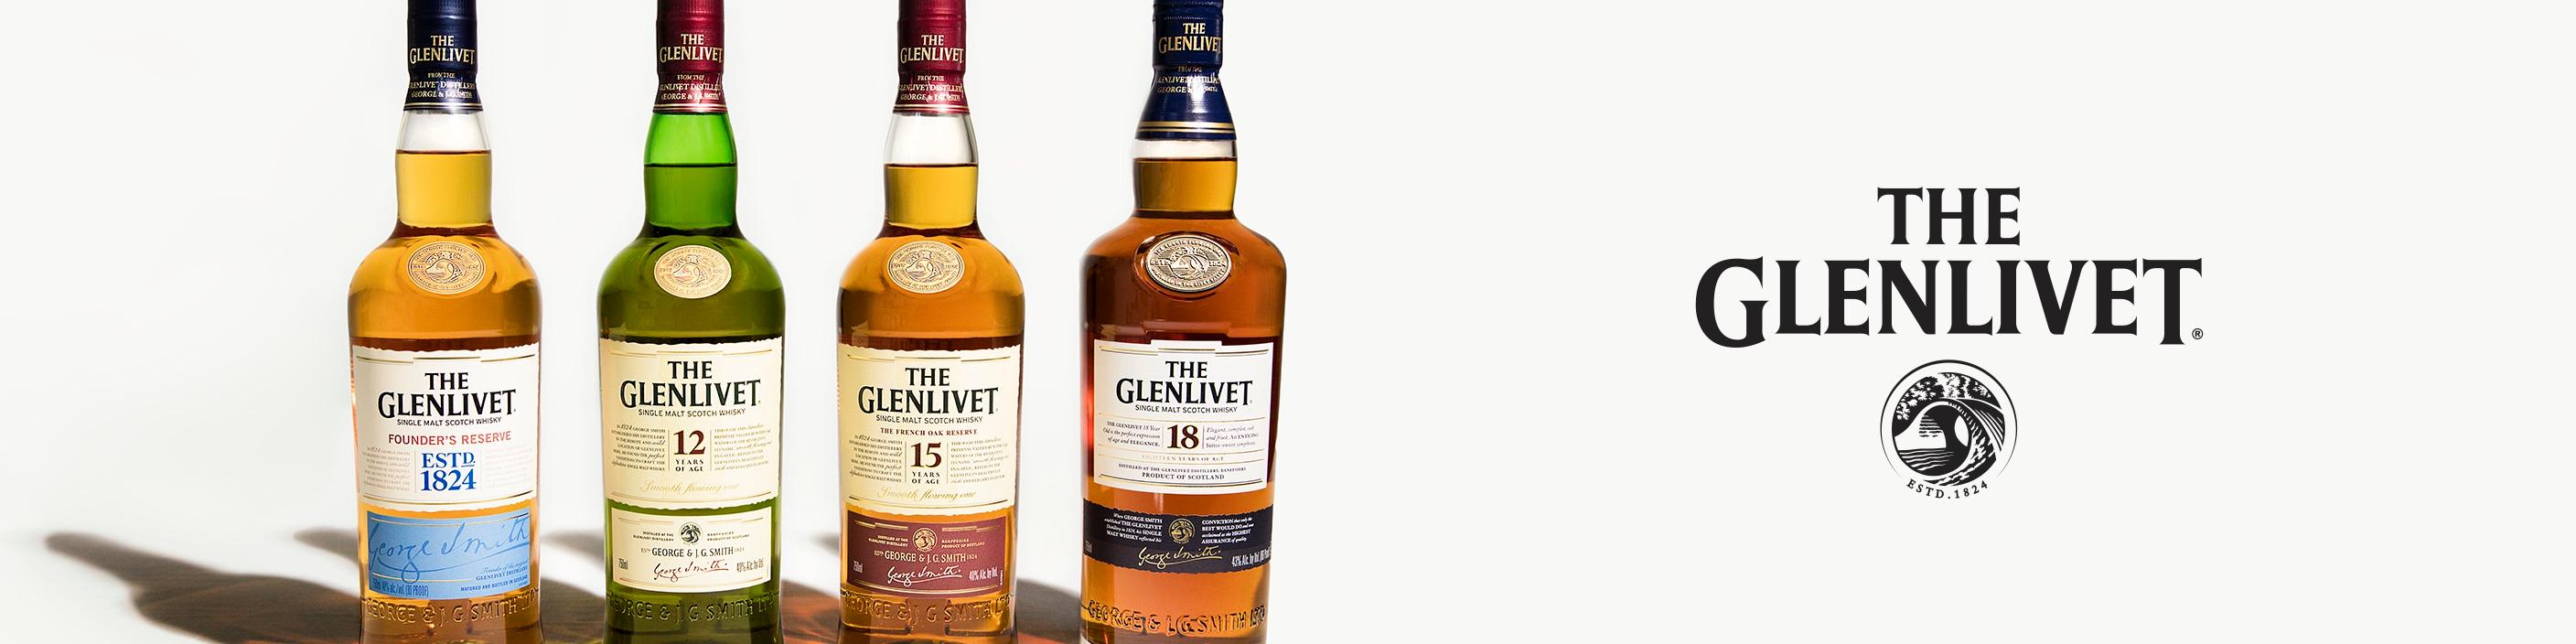 Founded in 1824, The Glenlivet is the leading single malt whisky in the U.S. with its smooth and fruity flavor profile. Our rule for drinking scotch? Drink it the way you like it – neat, on the rocks or in a cocktail.

Buy The Glenlivet online now from your nearby liquor store via Minibar Delivery. 